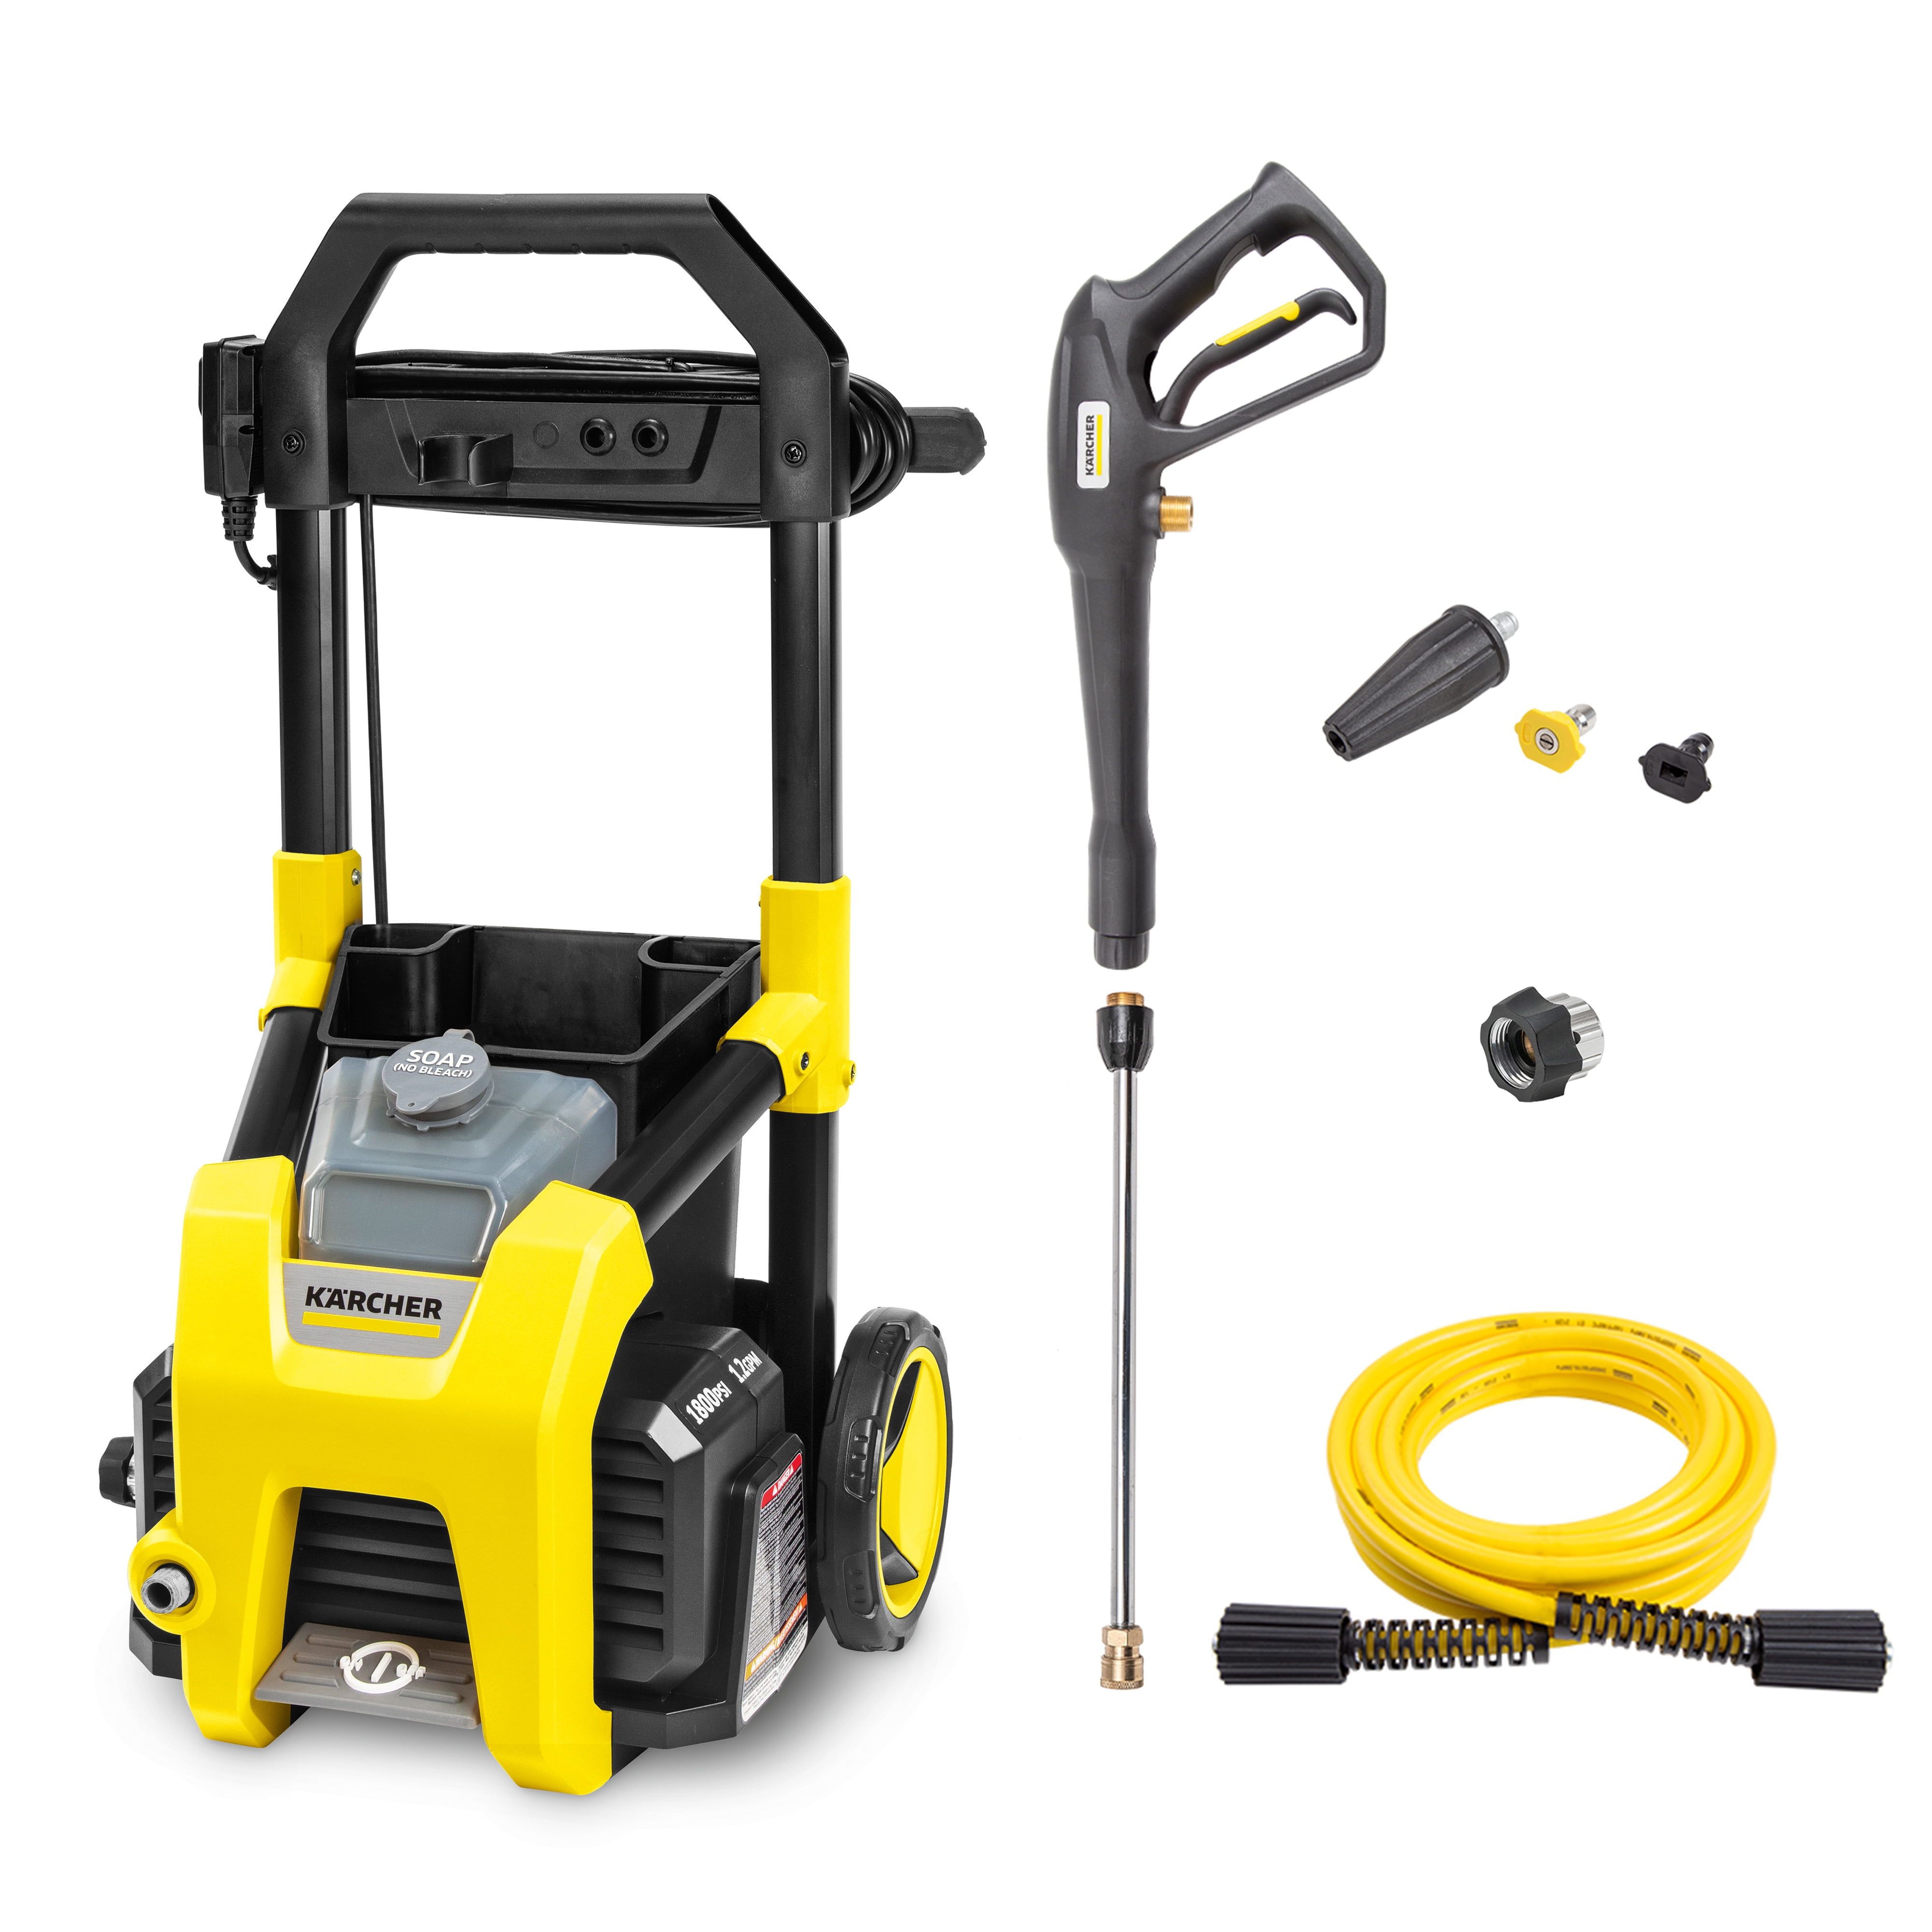 Karcher K1800PS 2250 Max PSI Electric Pressure Washer with 3